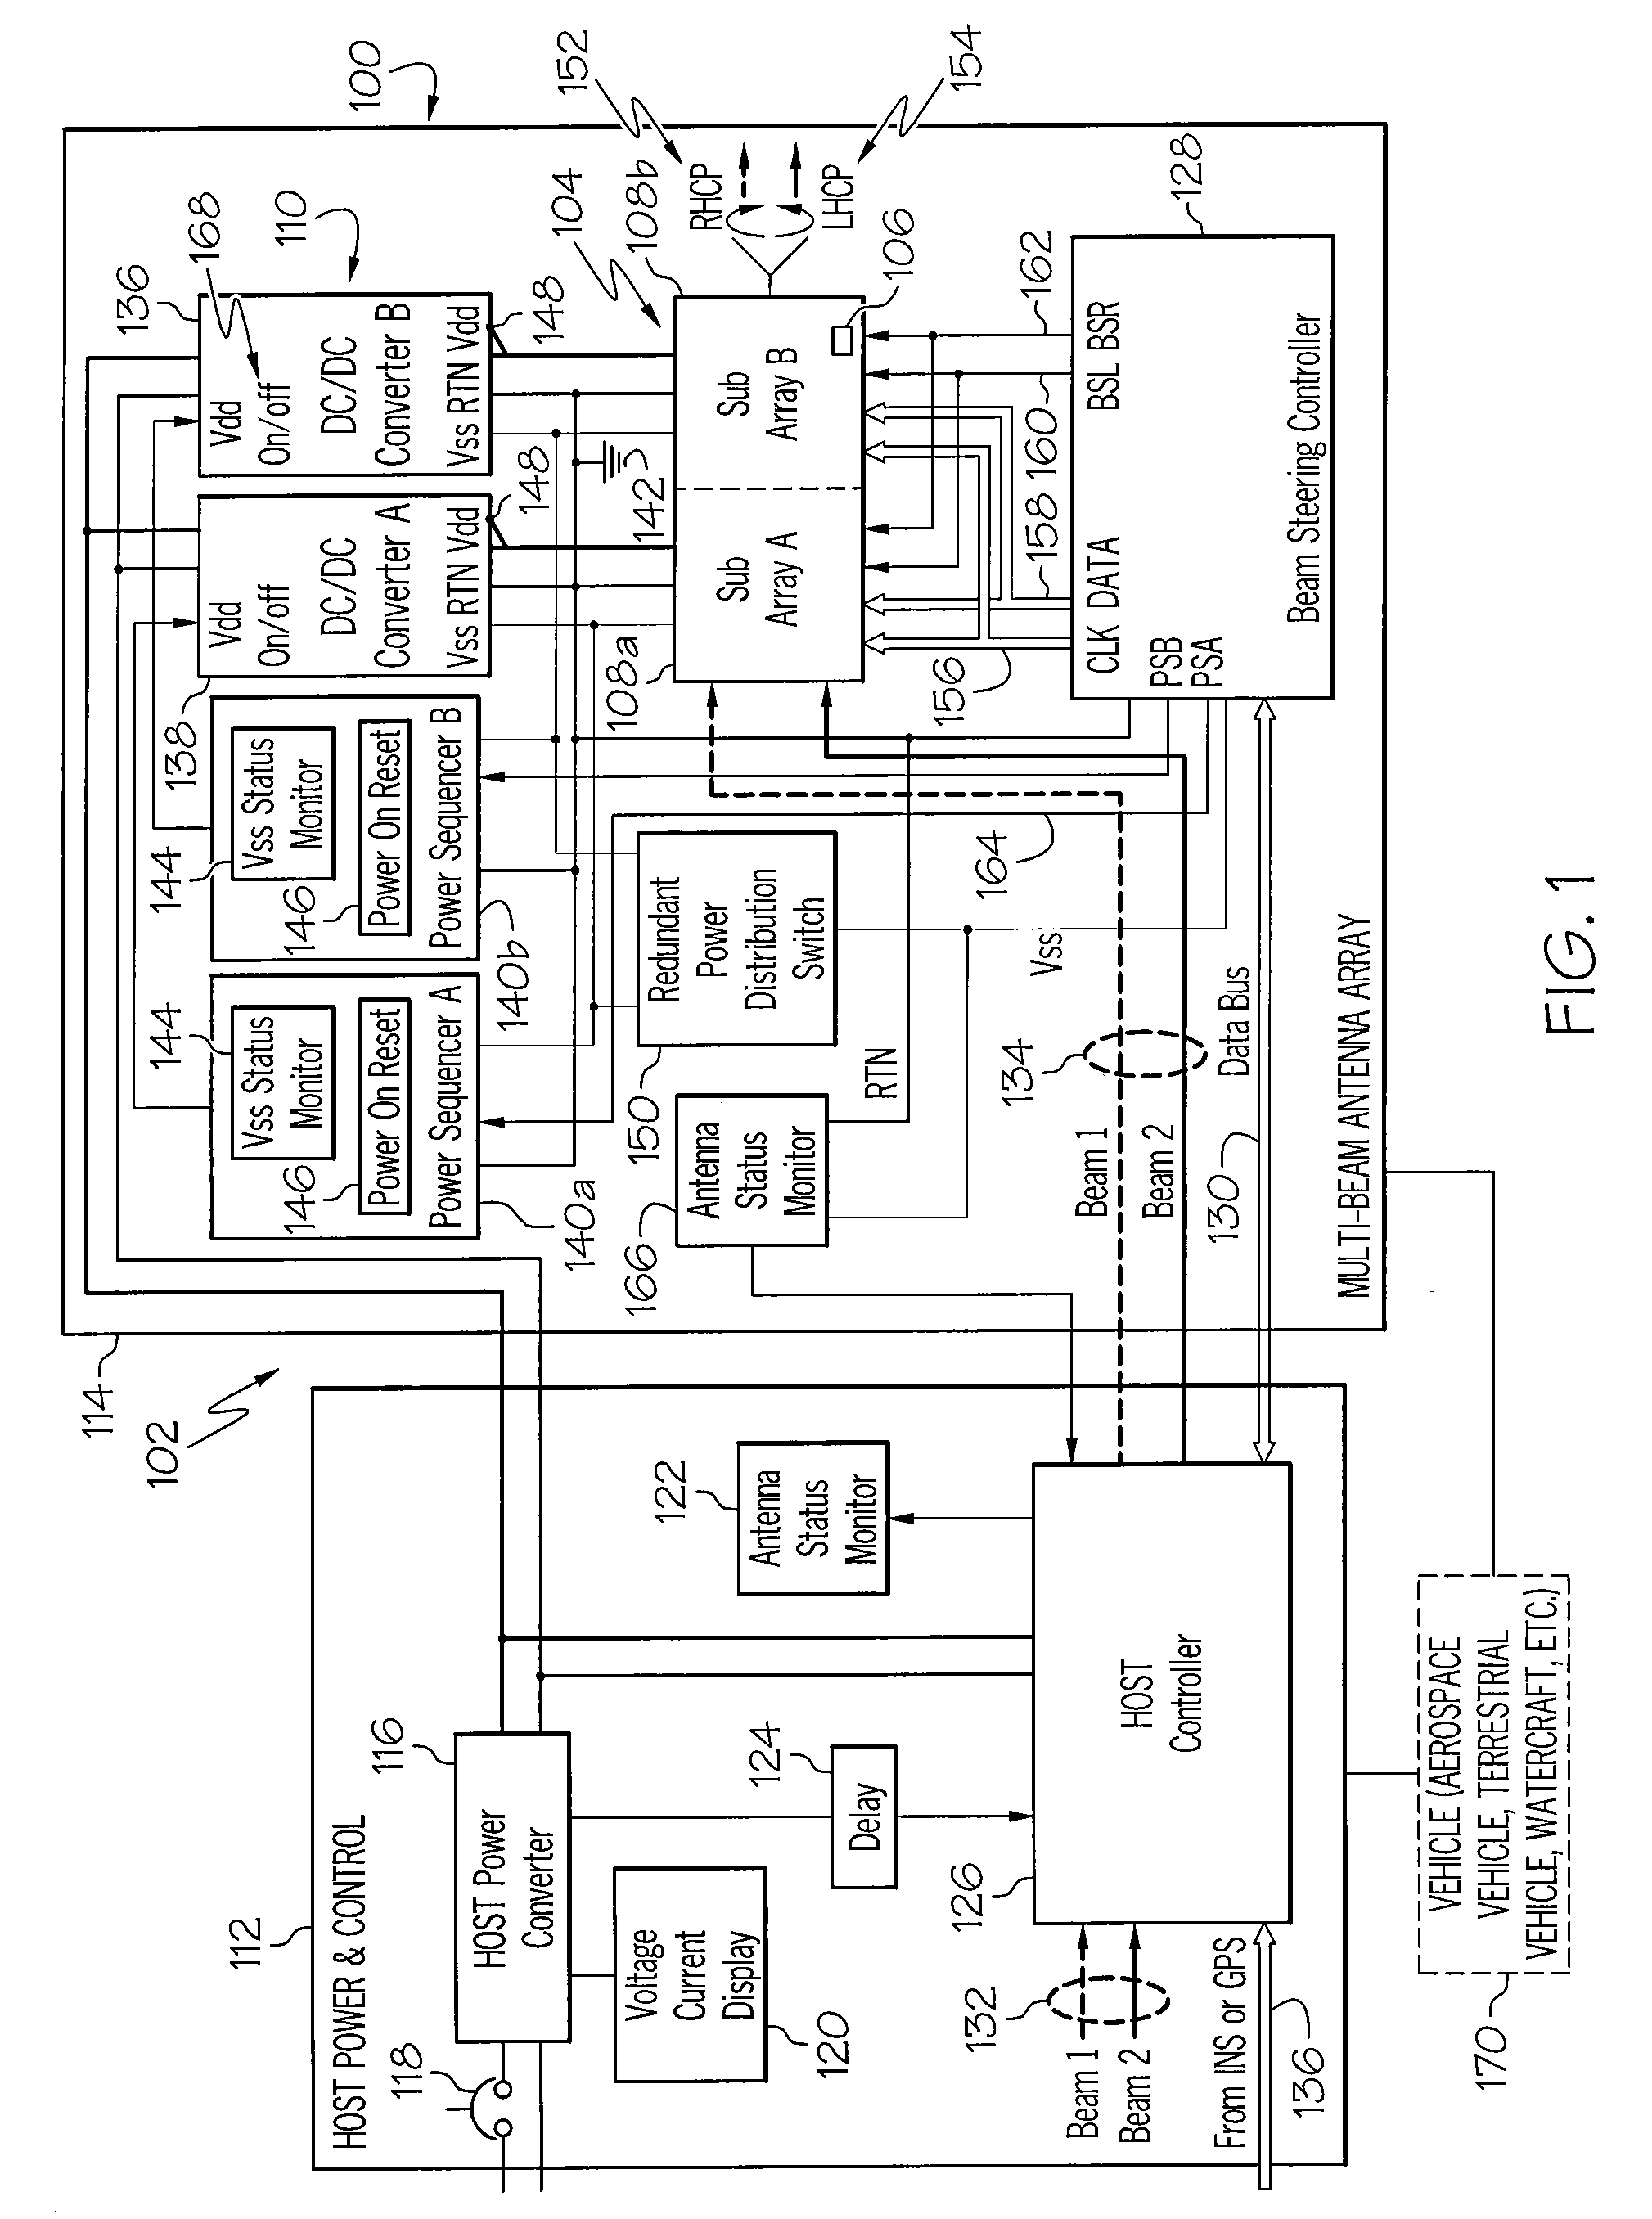 Antenna system including a power management and control system